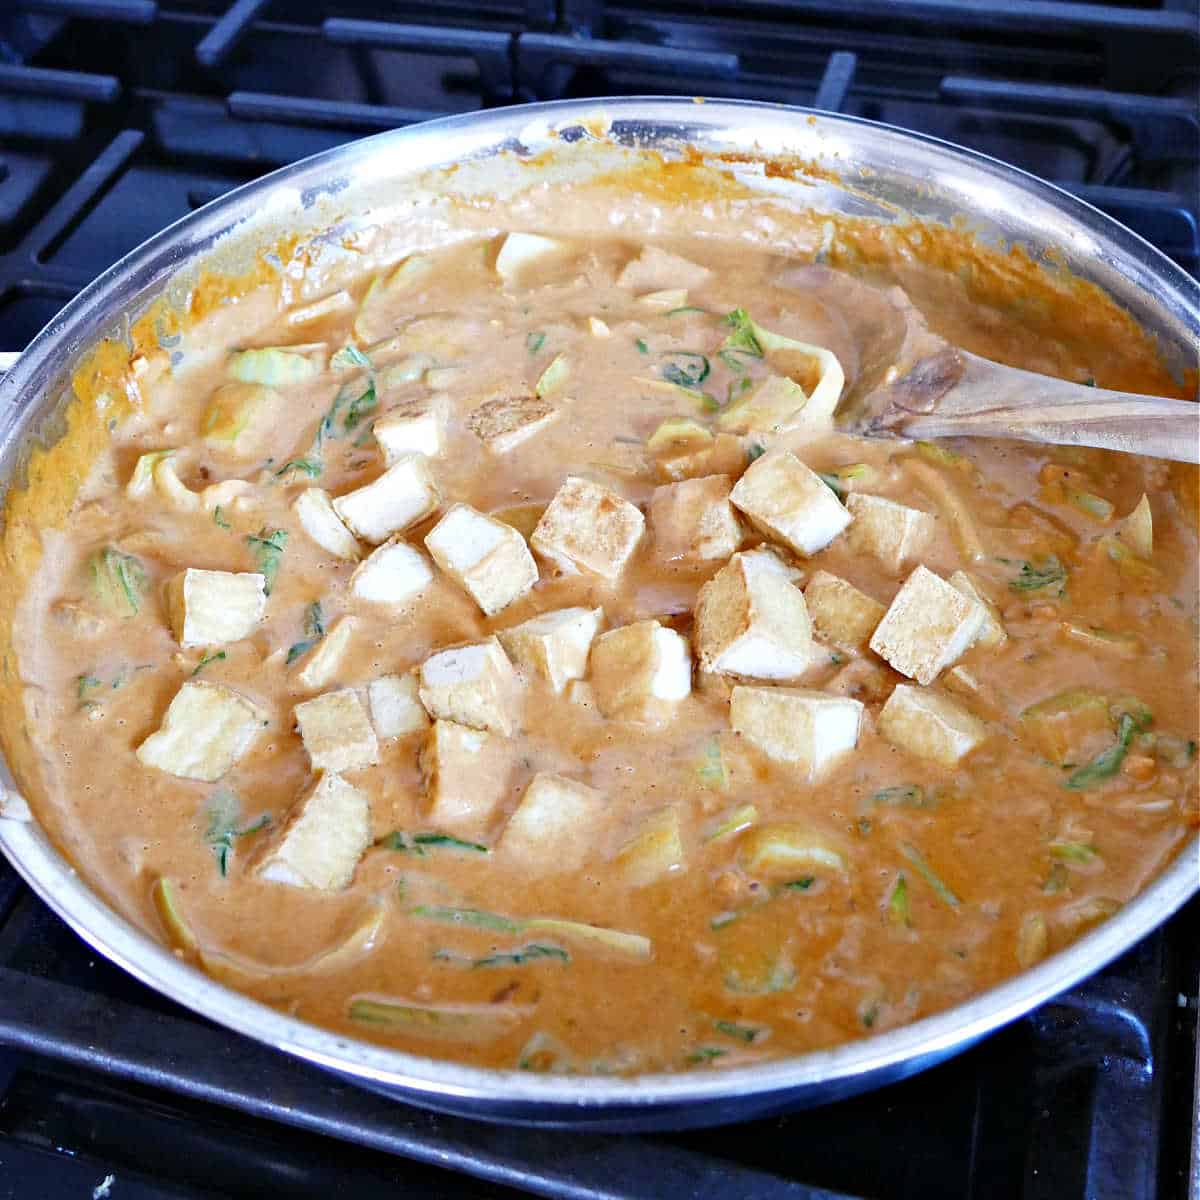 Stirring in the cooked tofu to the coconut milk peanut butter sauce.